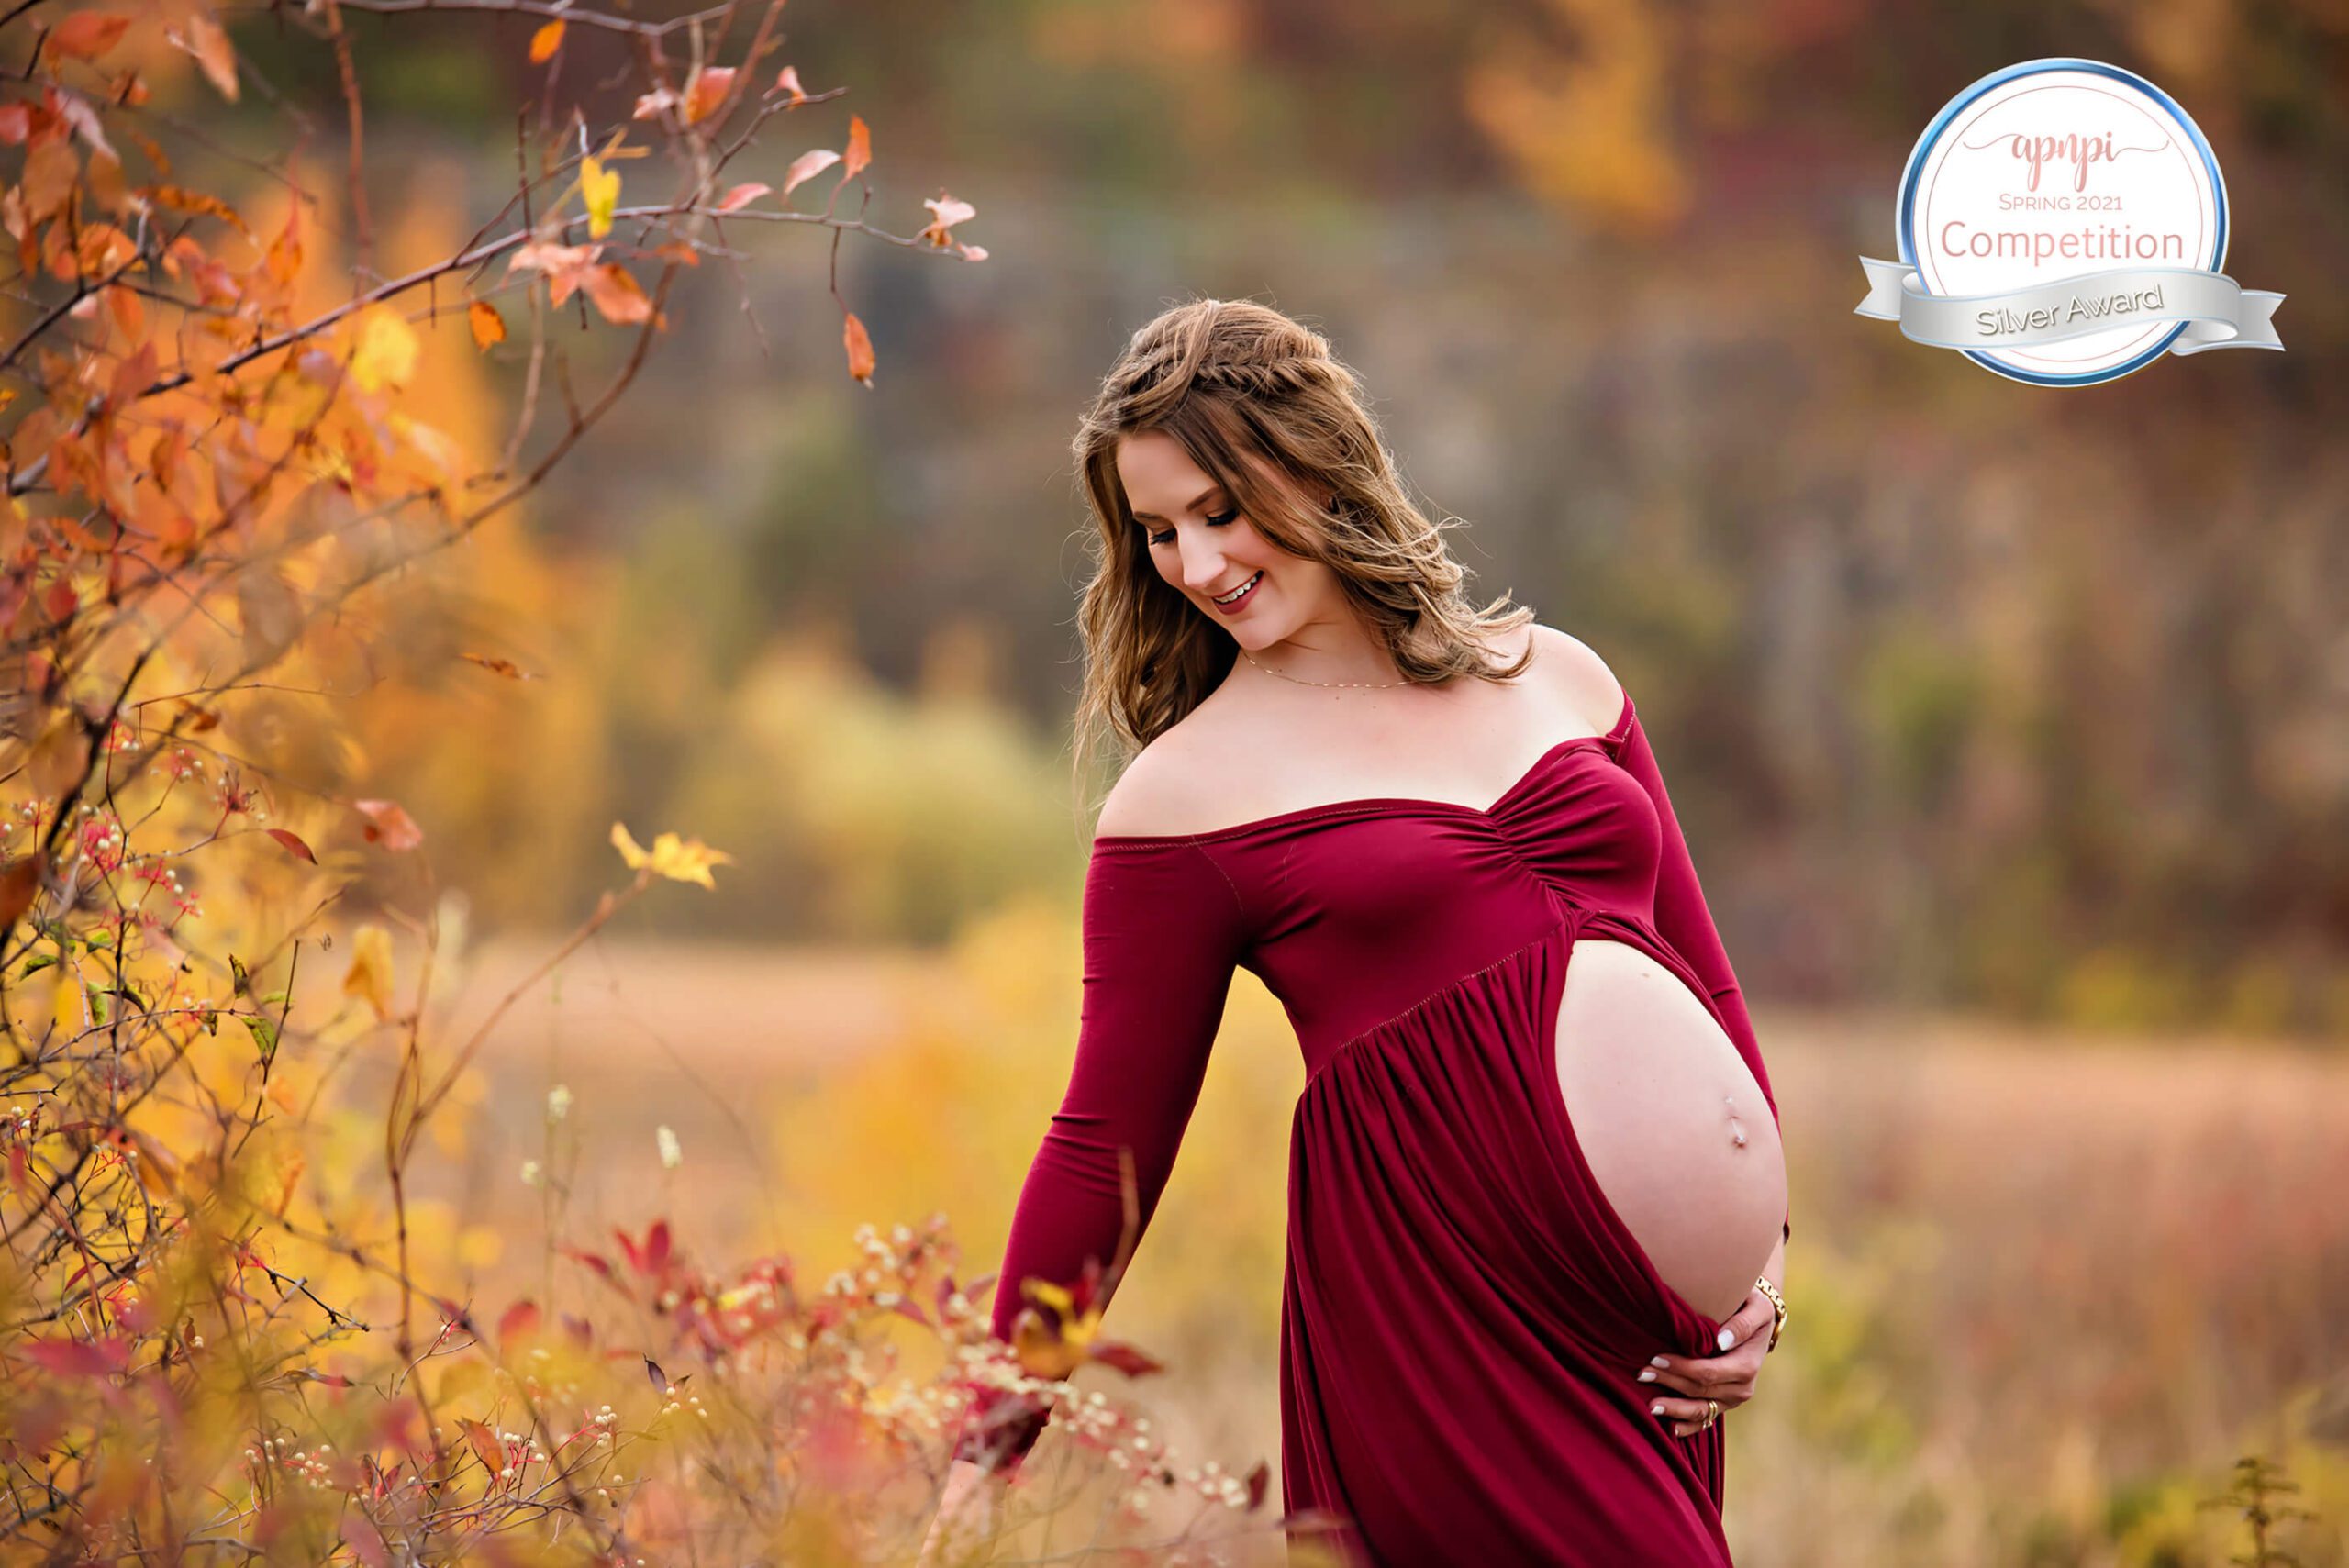 APNPI Maternity award of pregnant mom wearing a red dress showing her belly in the fall